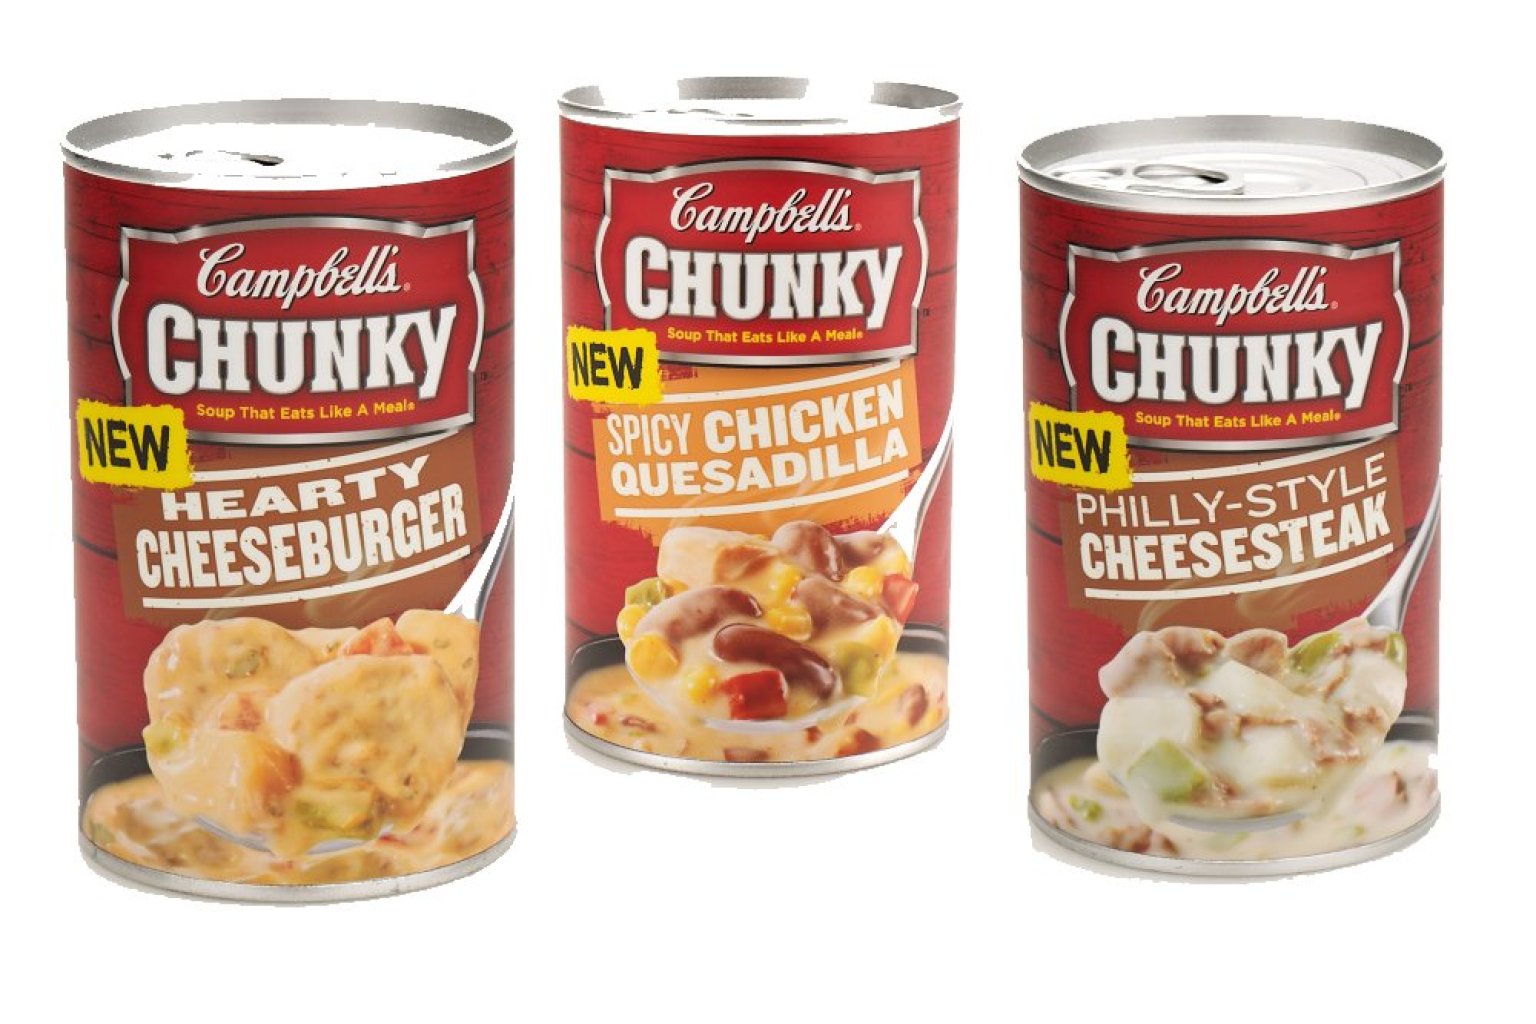 campbell-s-new-chunky-soup-flavors-are-literally-the-worst-huffpost